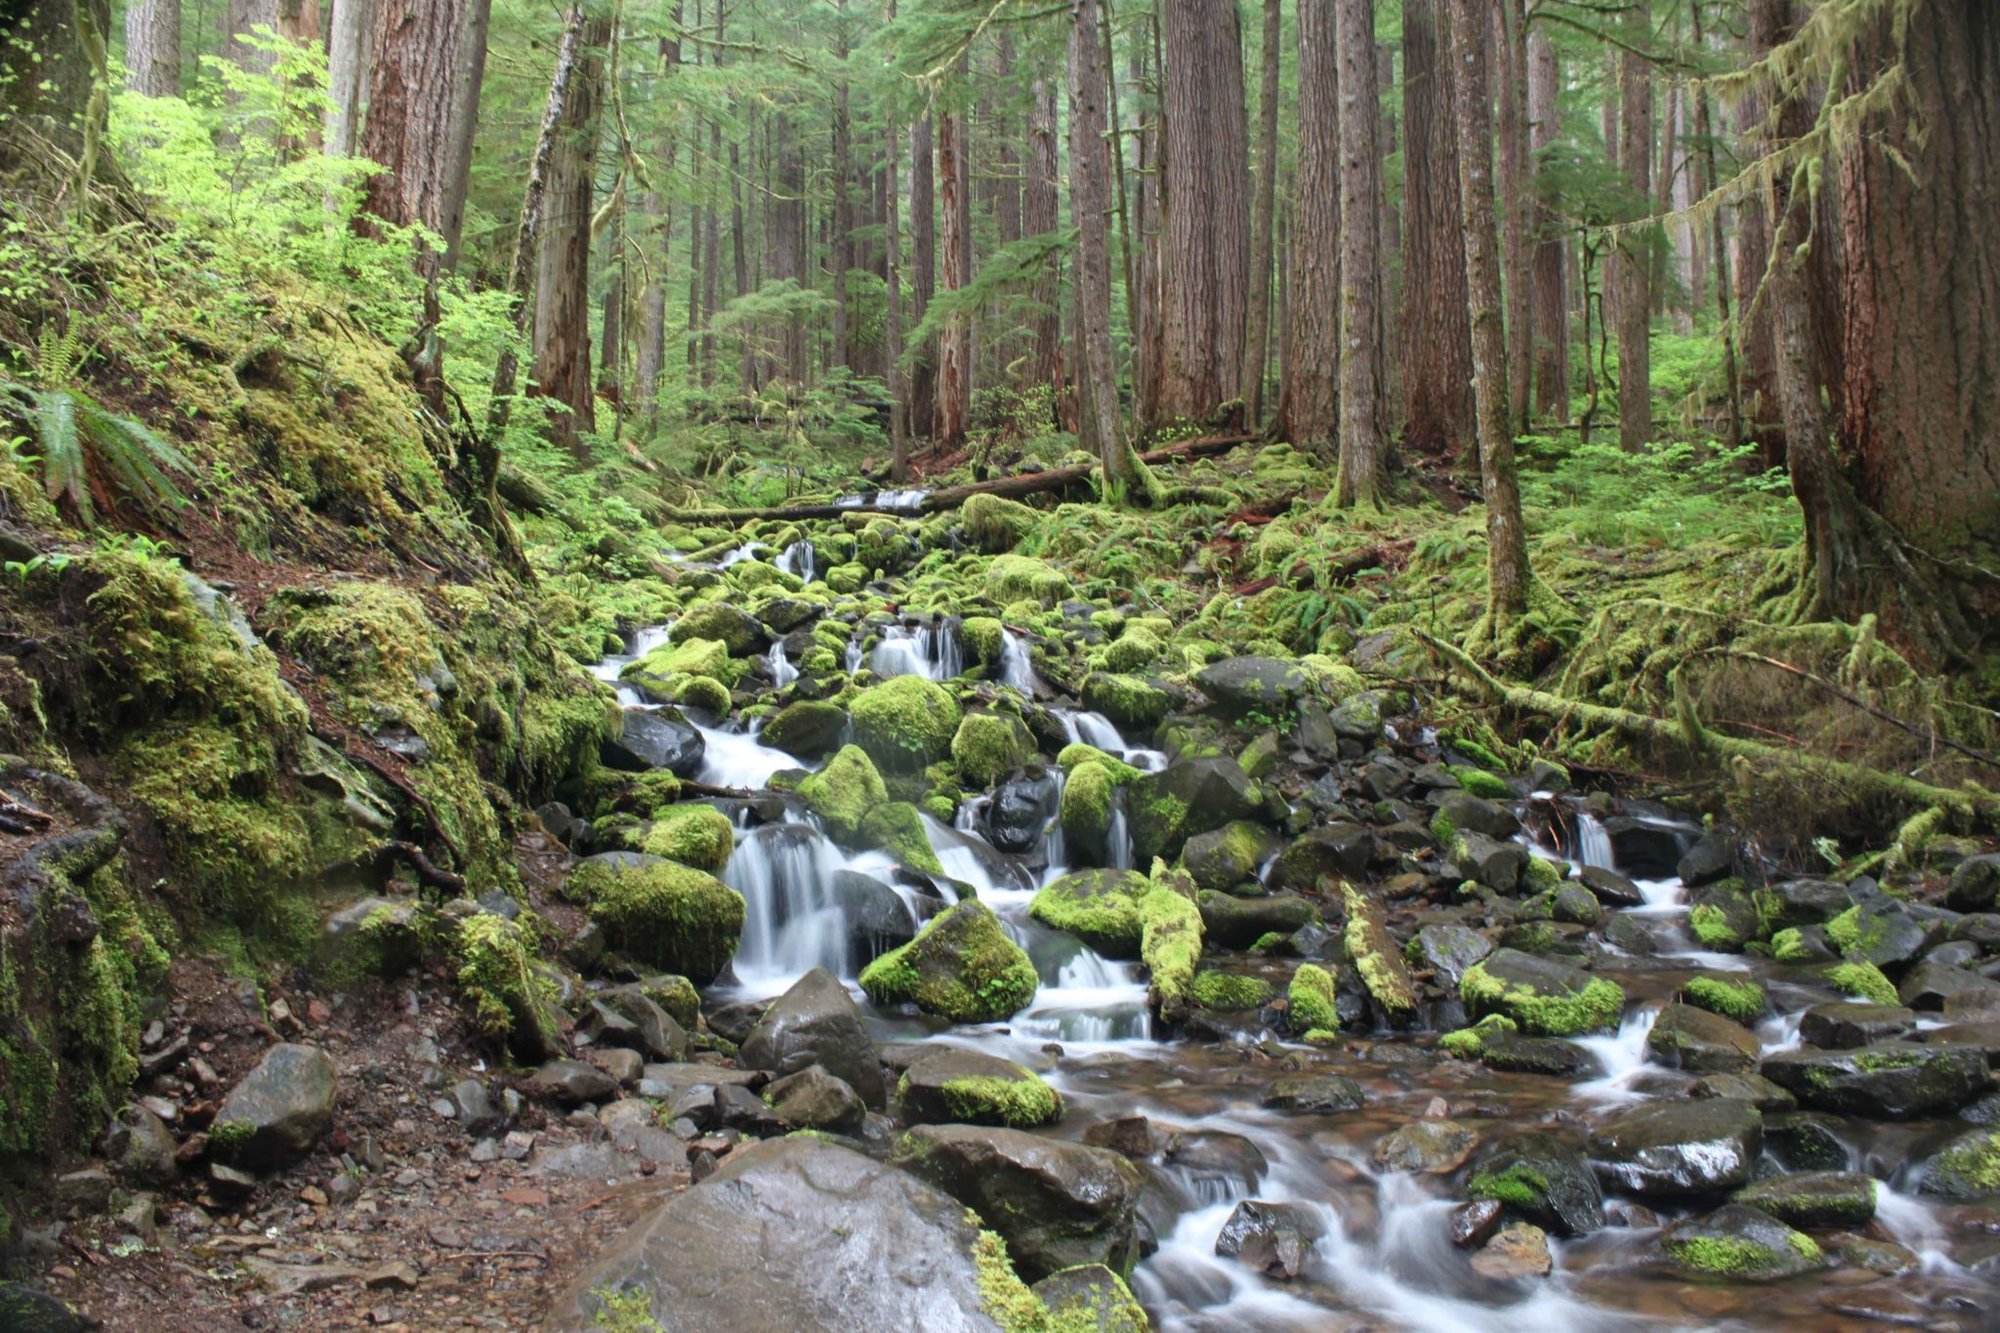 Olympic National Park. Photo courtesy of the National Parks Service.